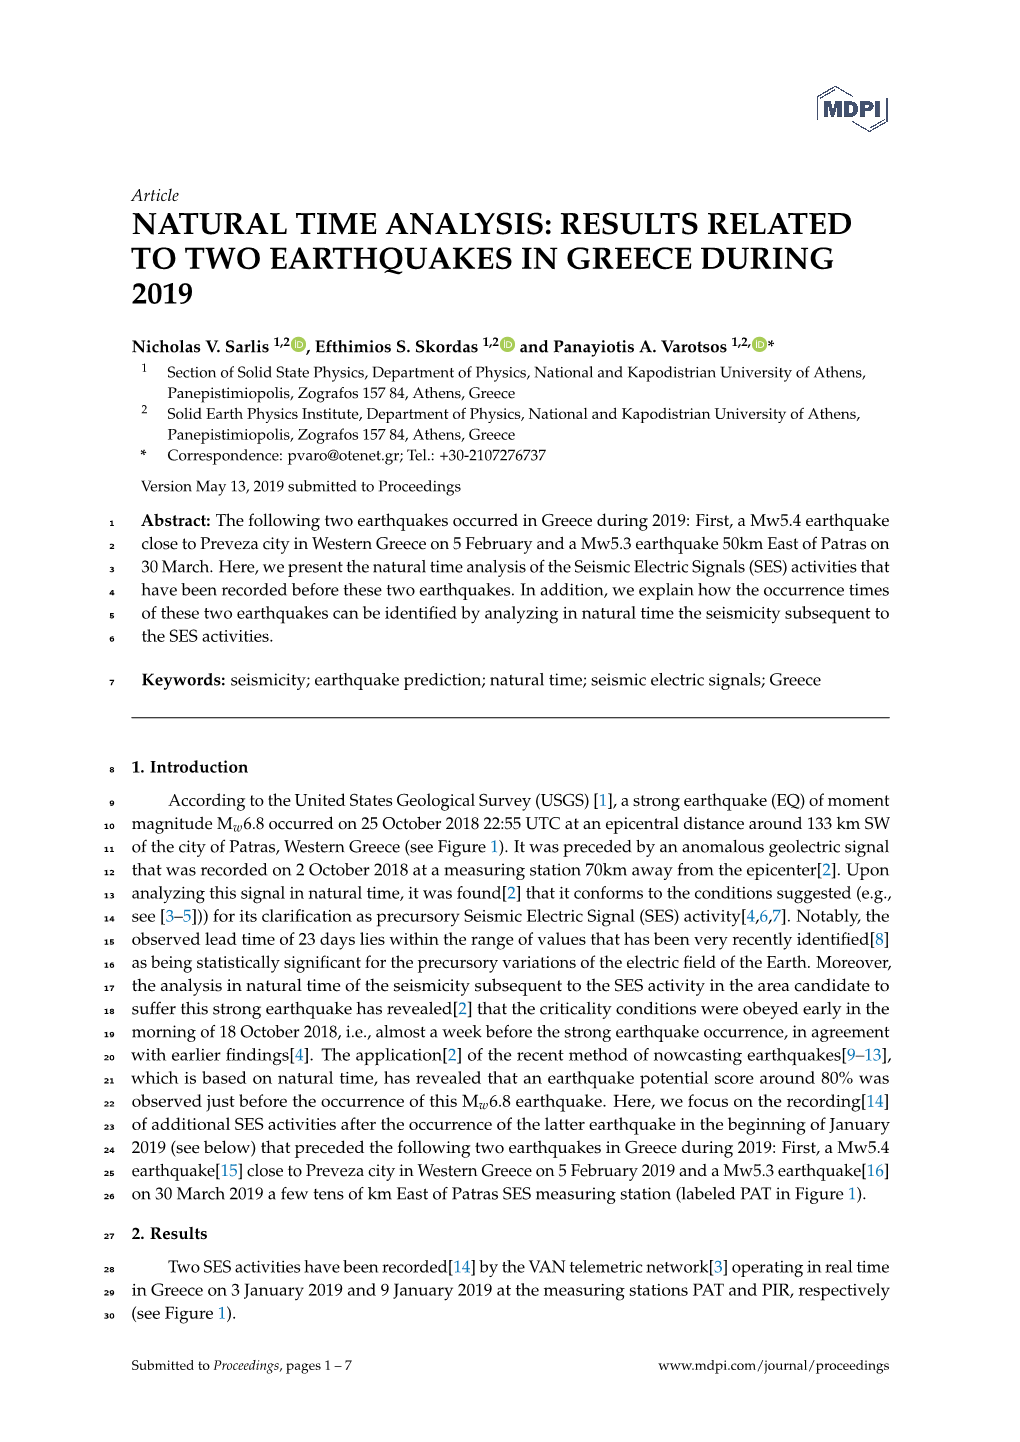 Natural Time Analysis: Results Related to Two Earthquakes in Greece During 2019